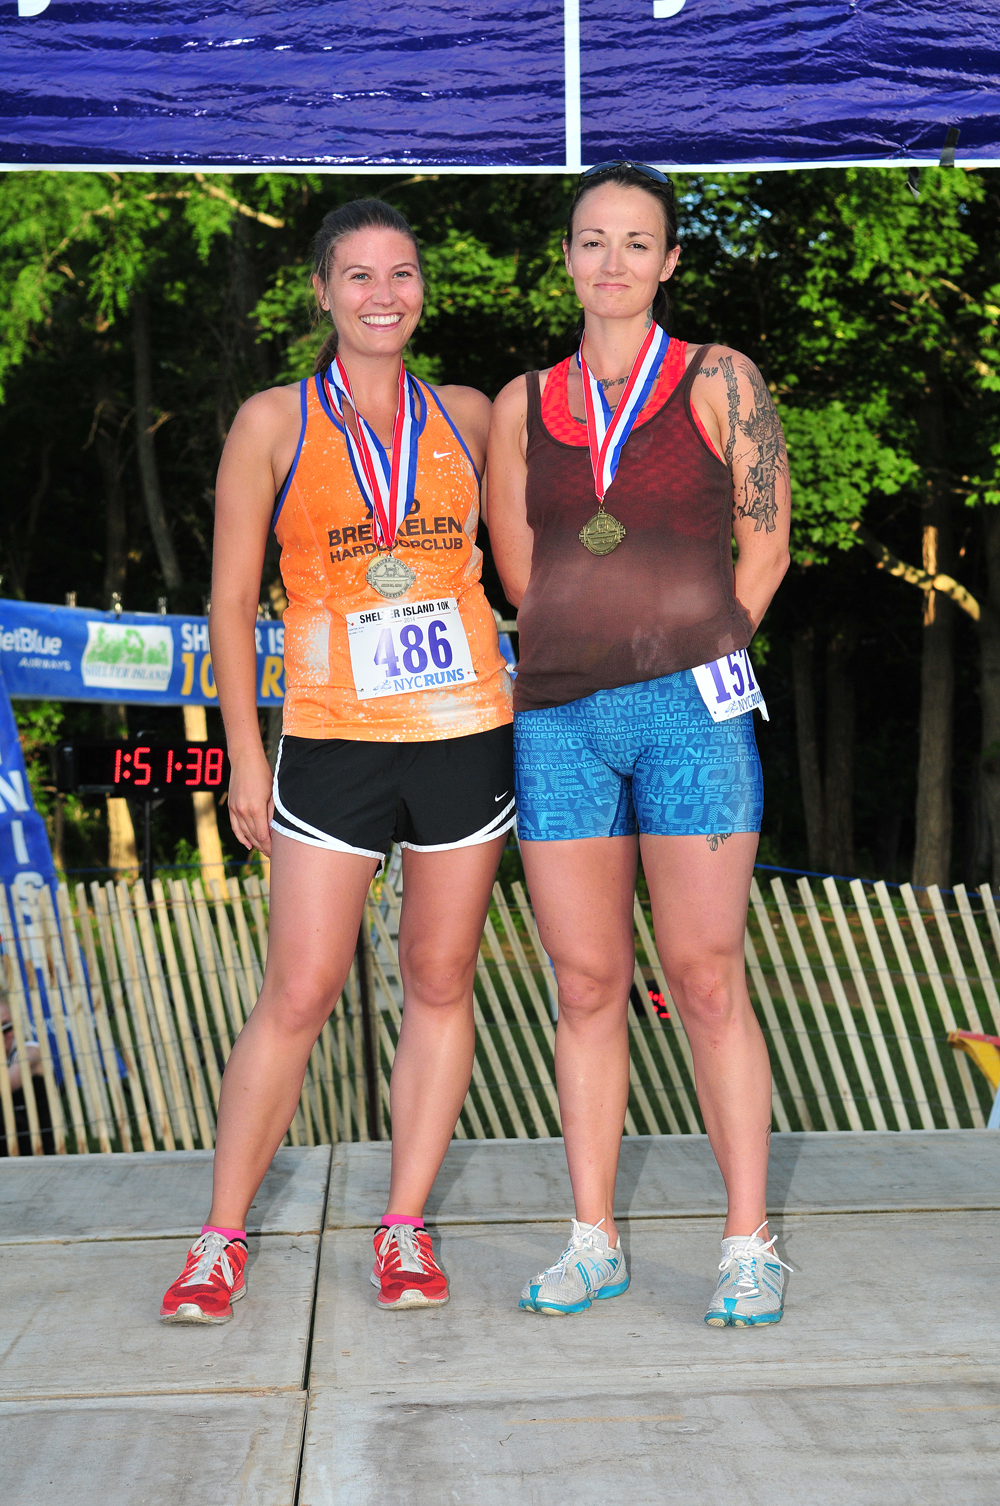 Grace Eginton (left) of Brooklyn placed second among women aged 25 to 19. Credit: Bill Landon)